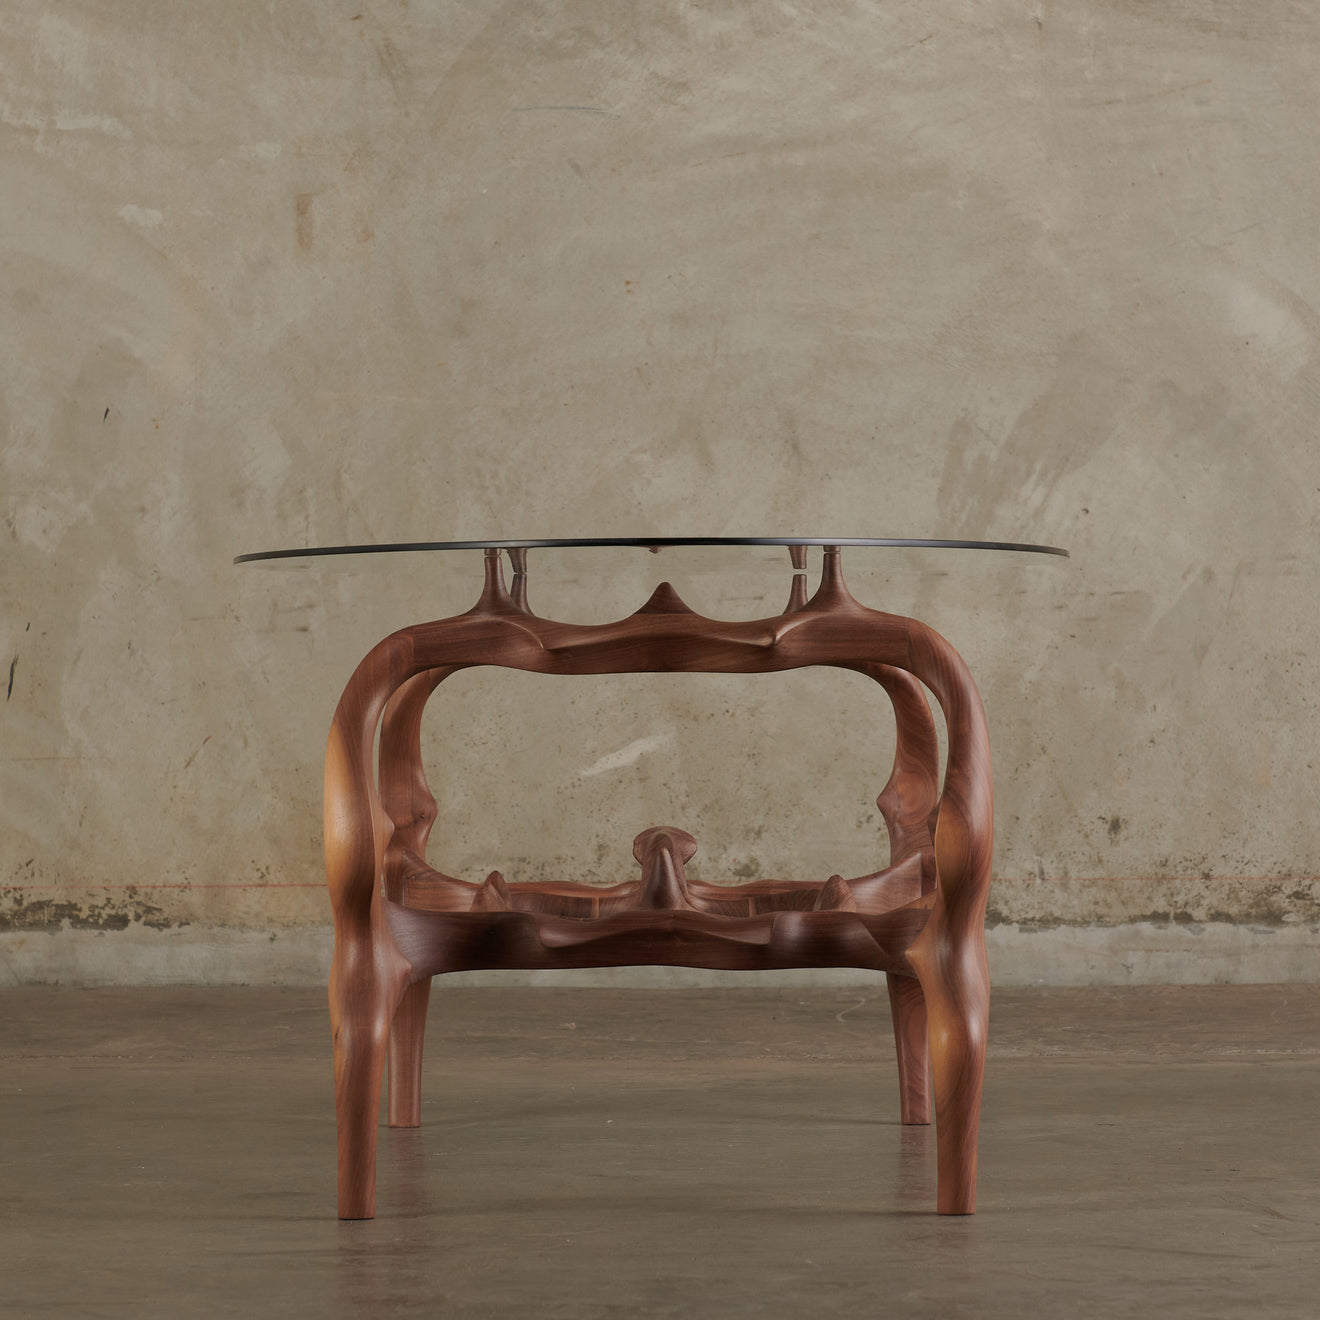 COFFEE TABLE DESIGNED BY VICTOR ROMAN MANUFACTURED BY ATELIER(ER)